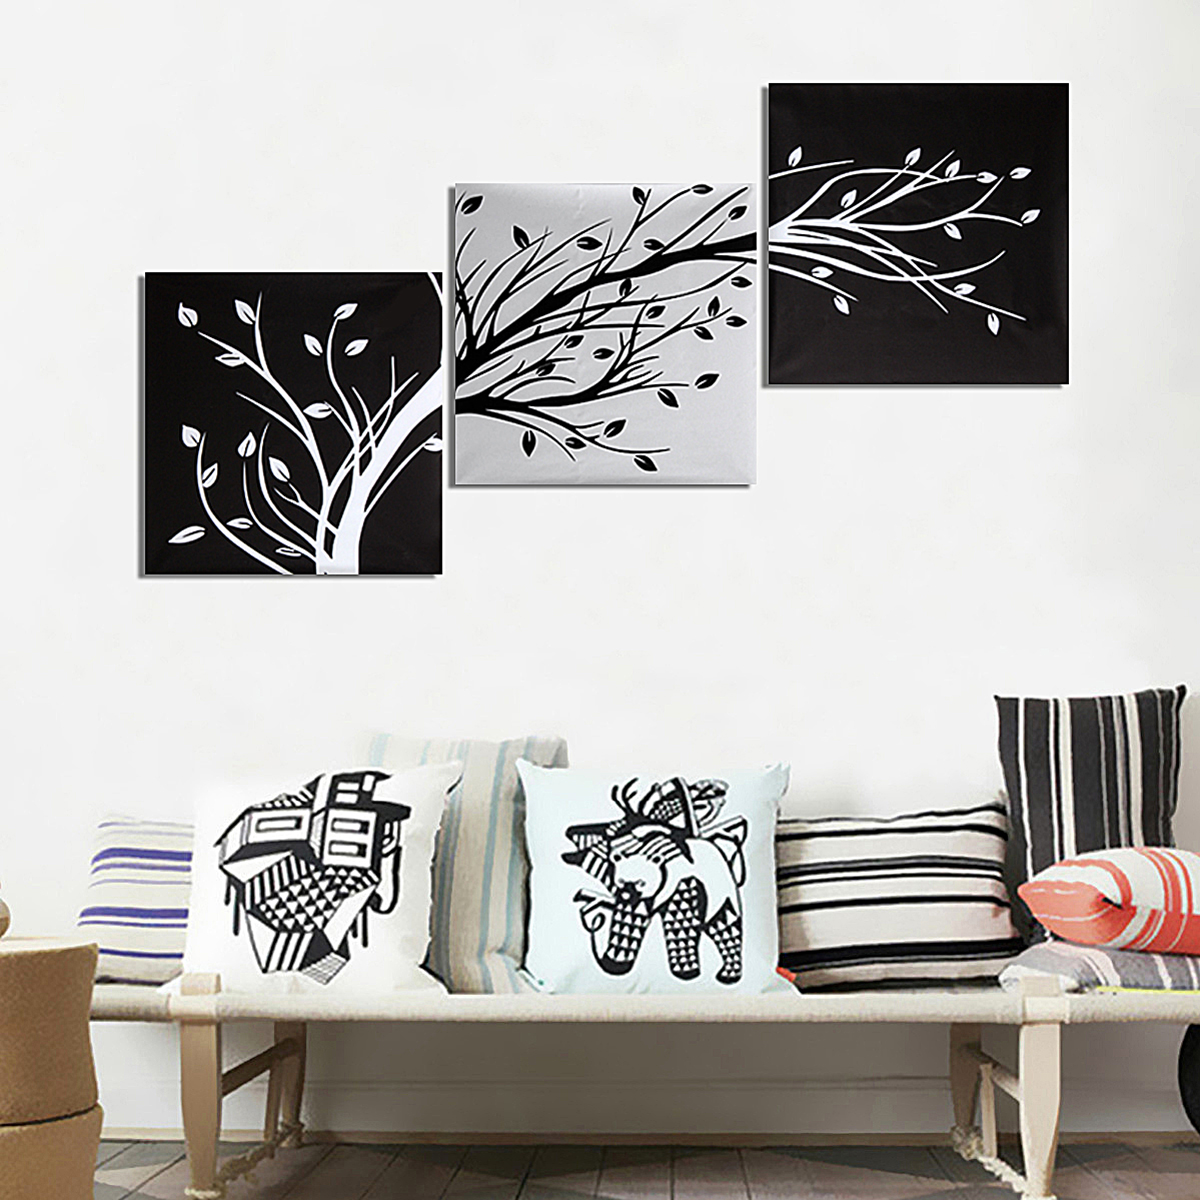 3Pcs-Wall-Decorative-Paintings-Abstract-Wood-Canvas-Print-Art-Pictures-Frameless-Wall-Hanging-Decor--1206624-5